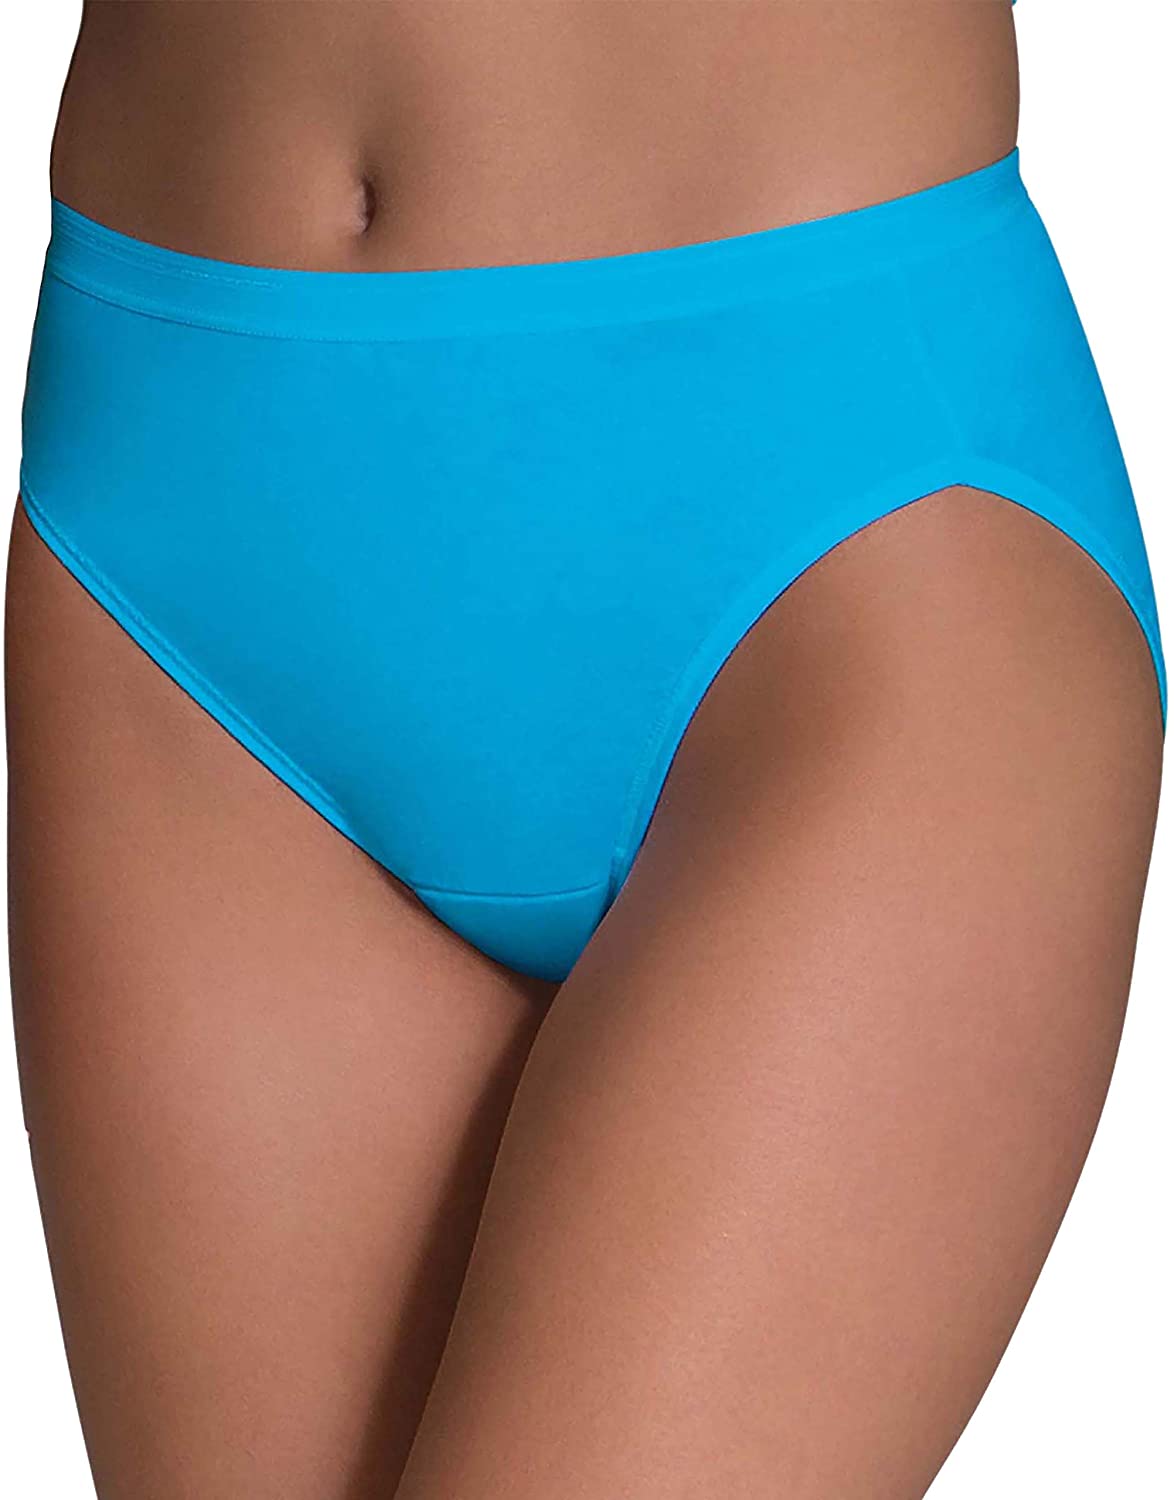 Fruit of the Loom Women's Assorted Cotton Brief Underwear, 6 Pack 